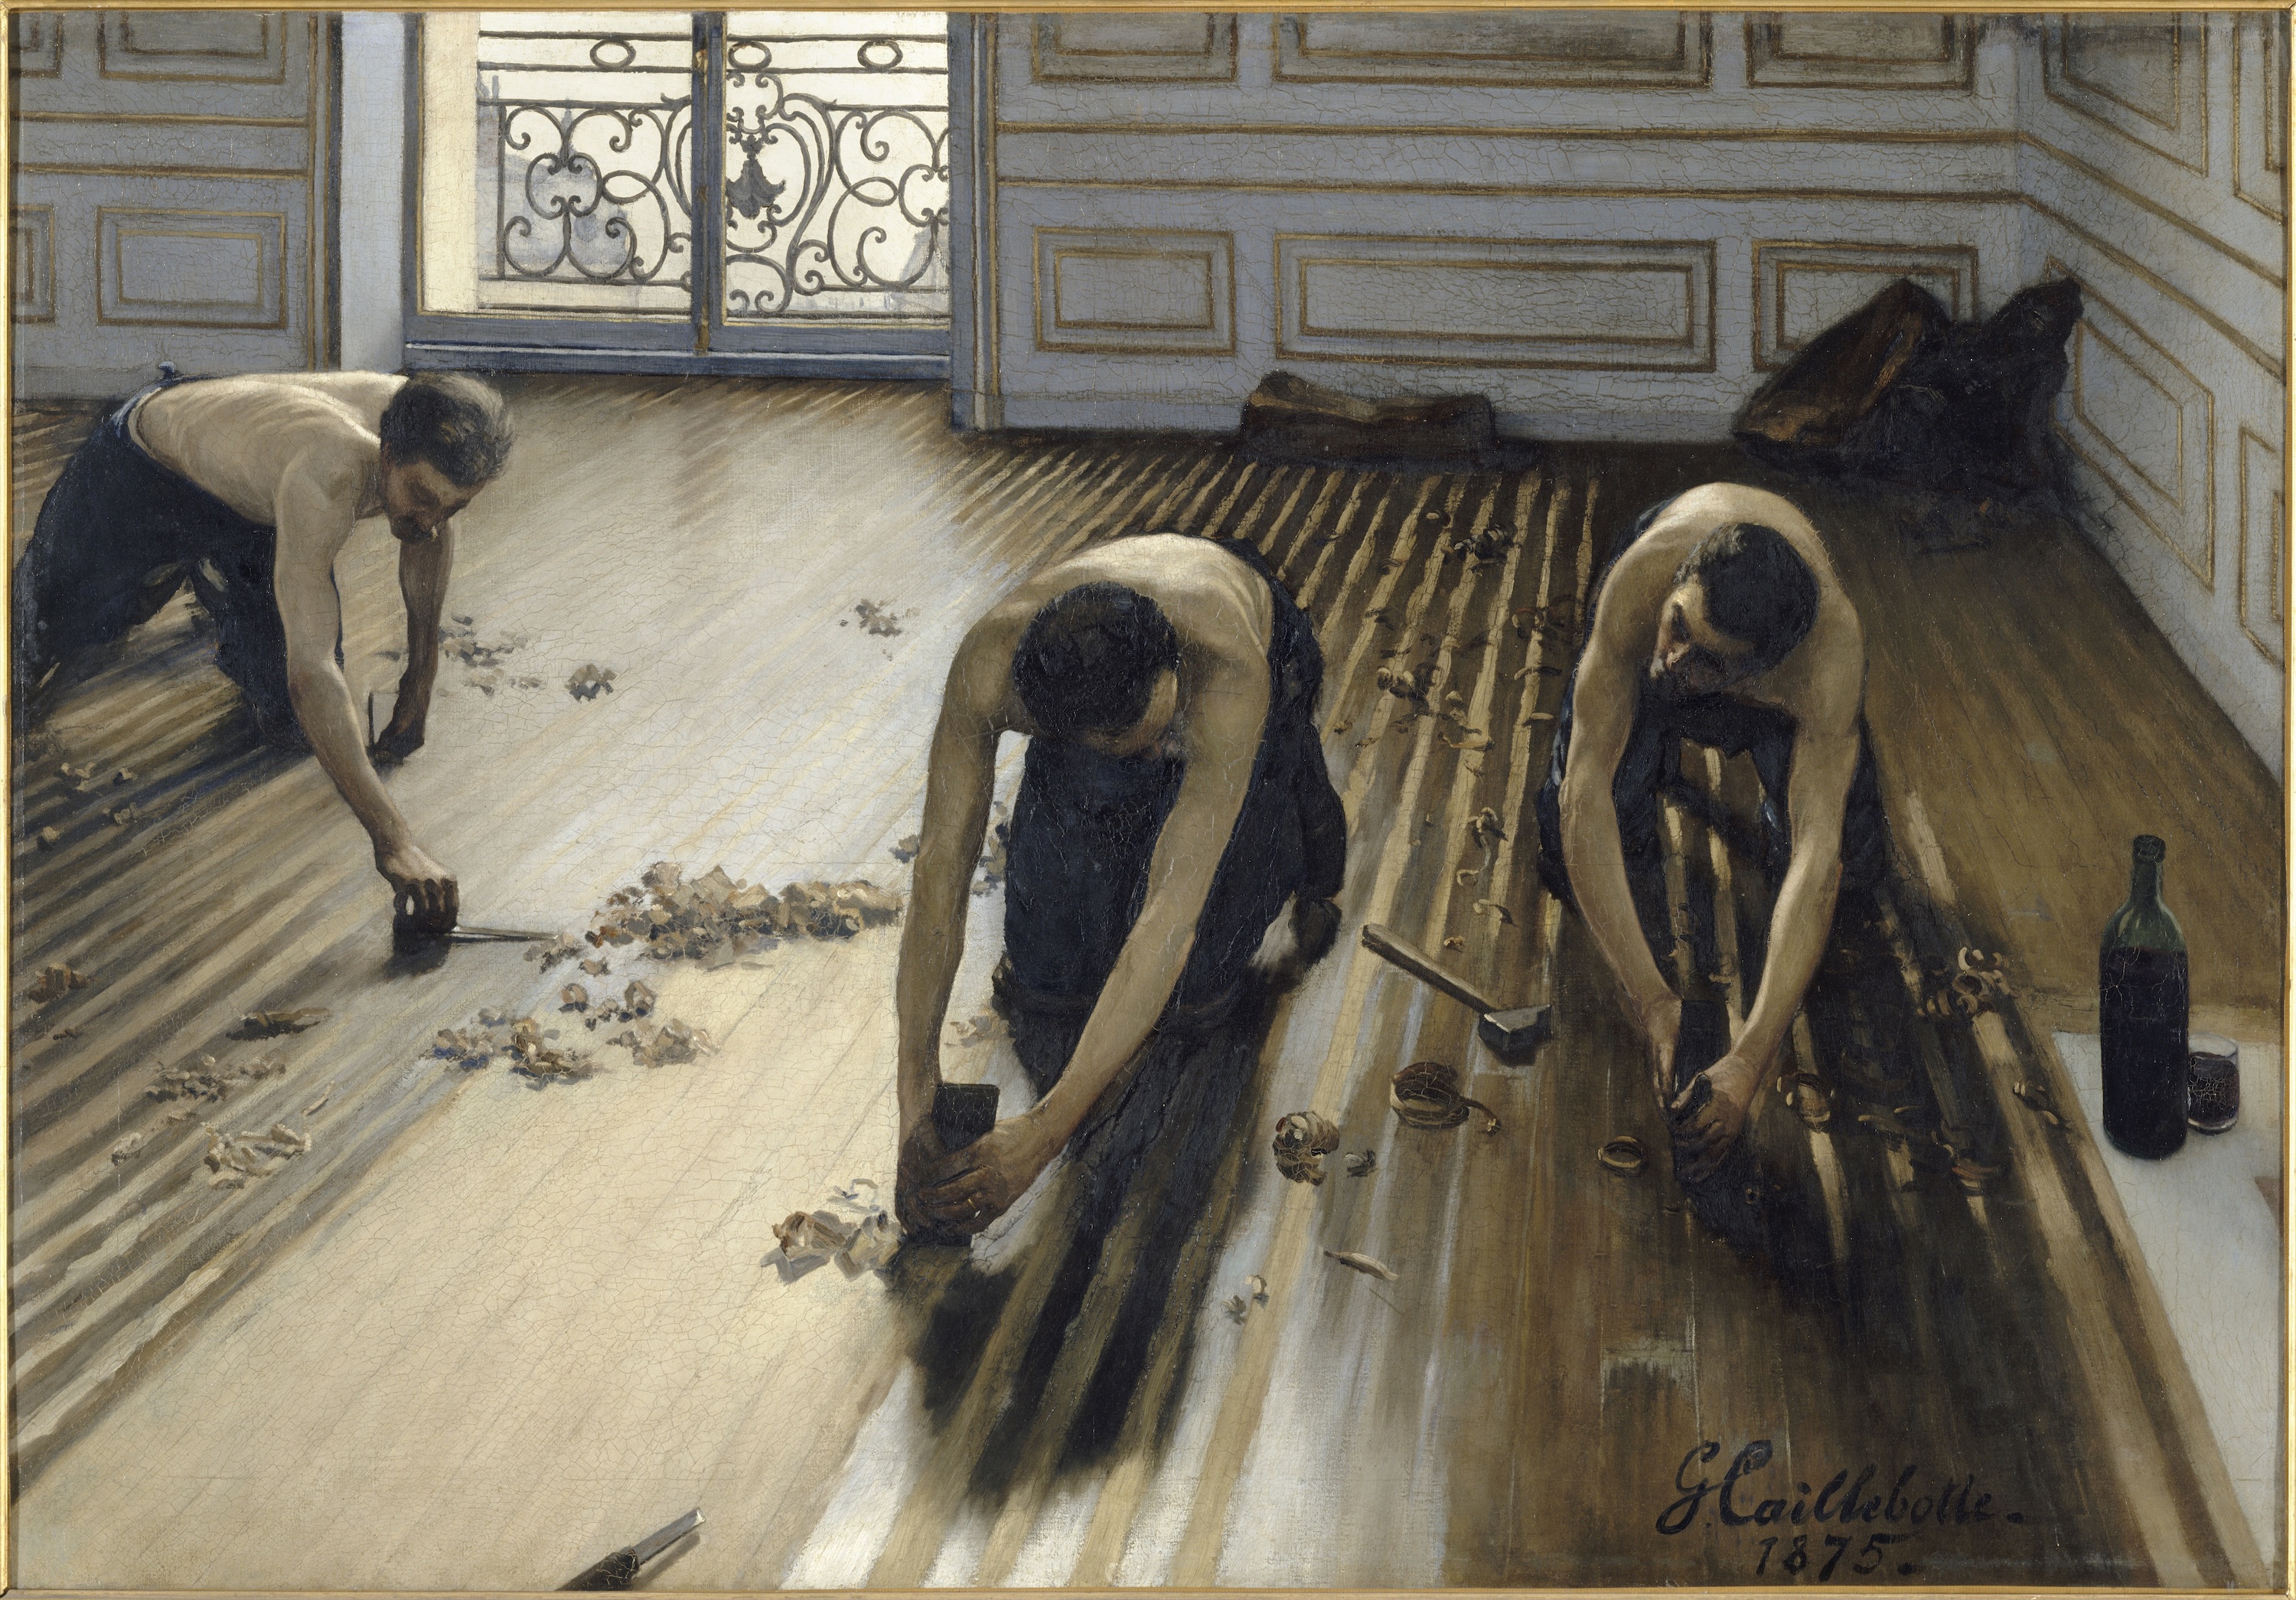 Floor Scrapers by Gustave Caillebotte - 1875 - 102 x 146.5 cm Musée d'Orsay